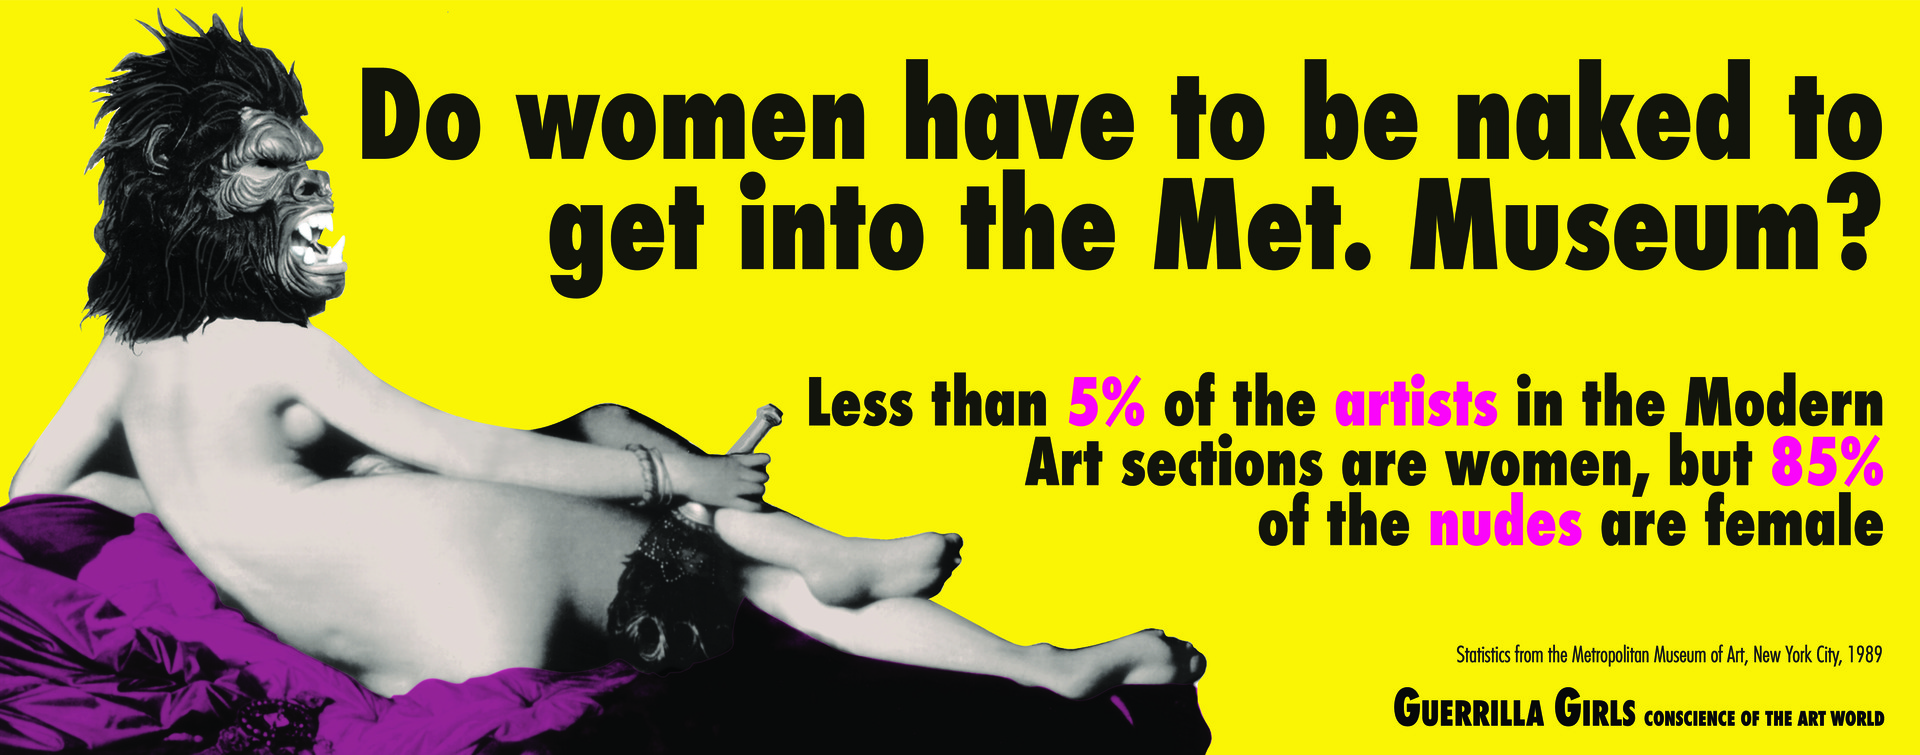 Guerrilla Girls, Do women have to be naked to get into the Met. Museum?, 1989.